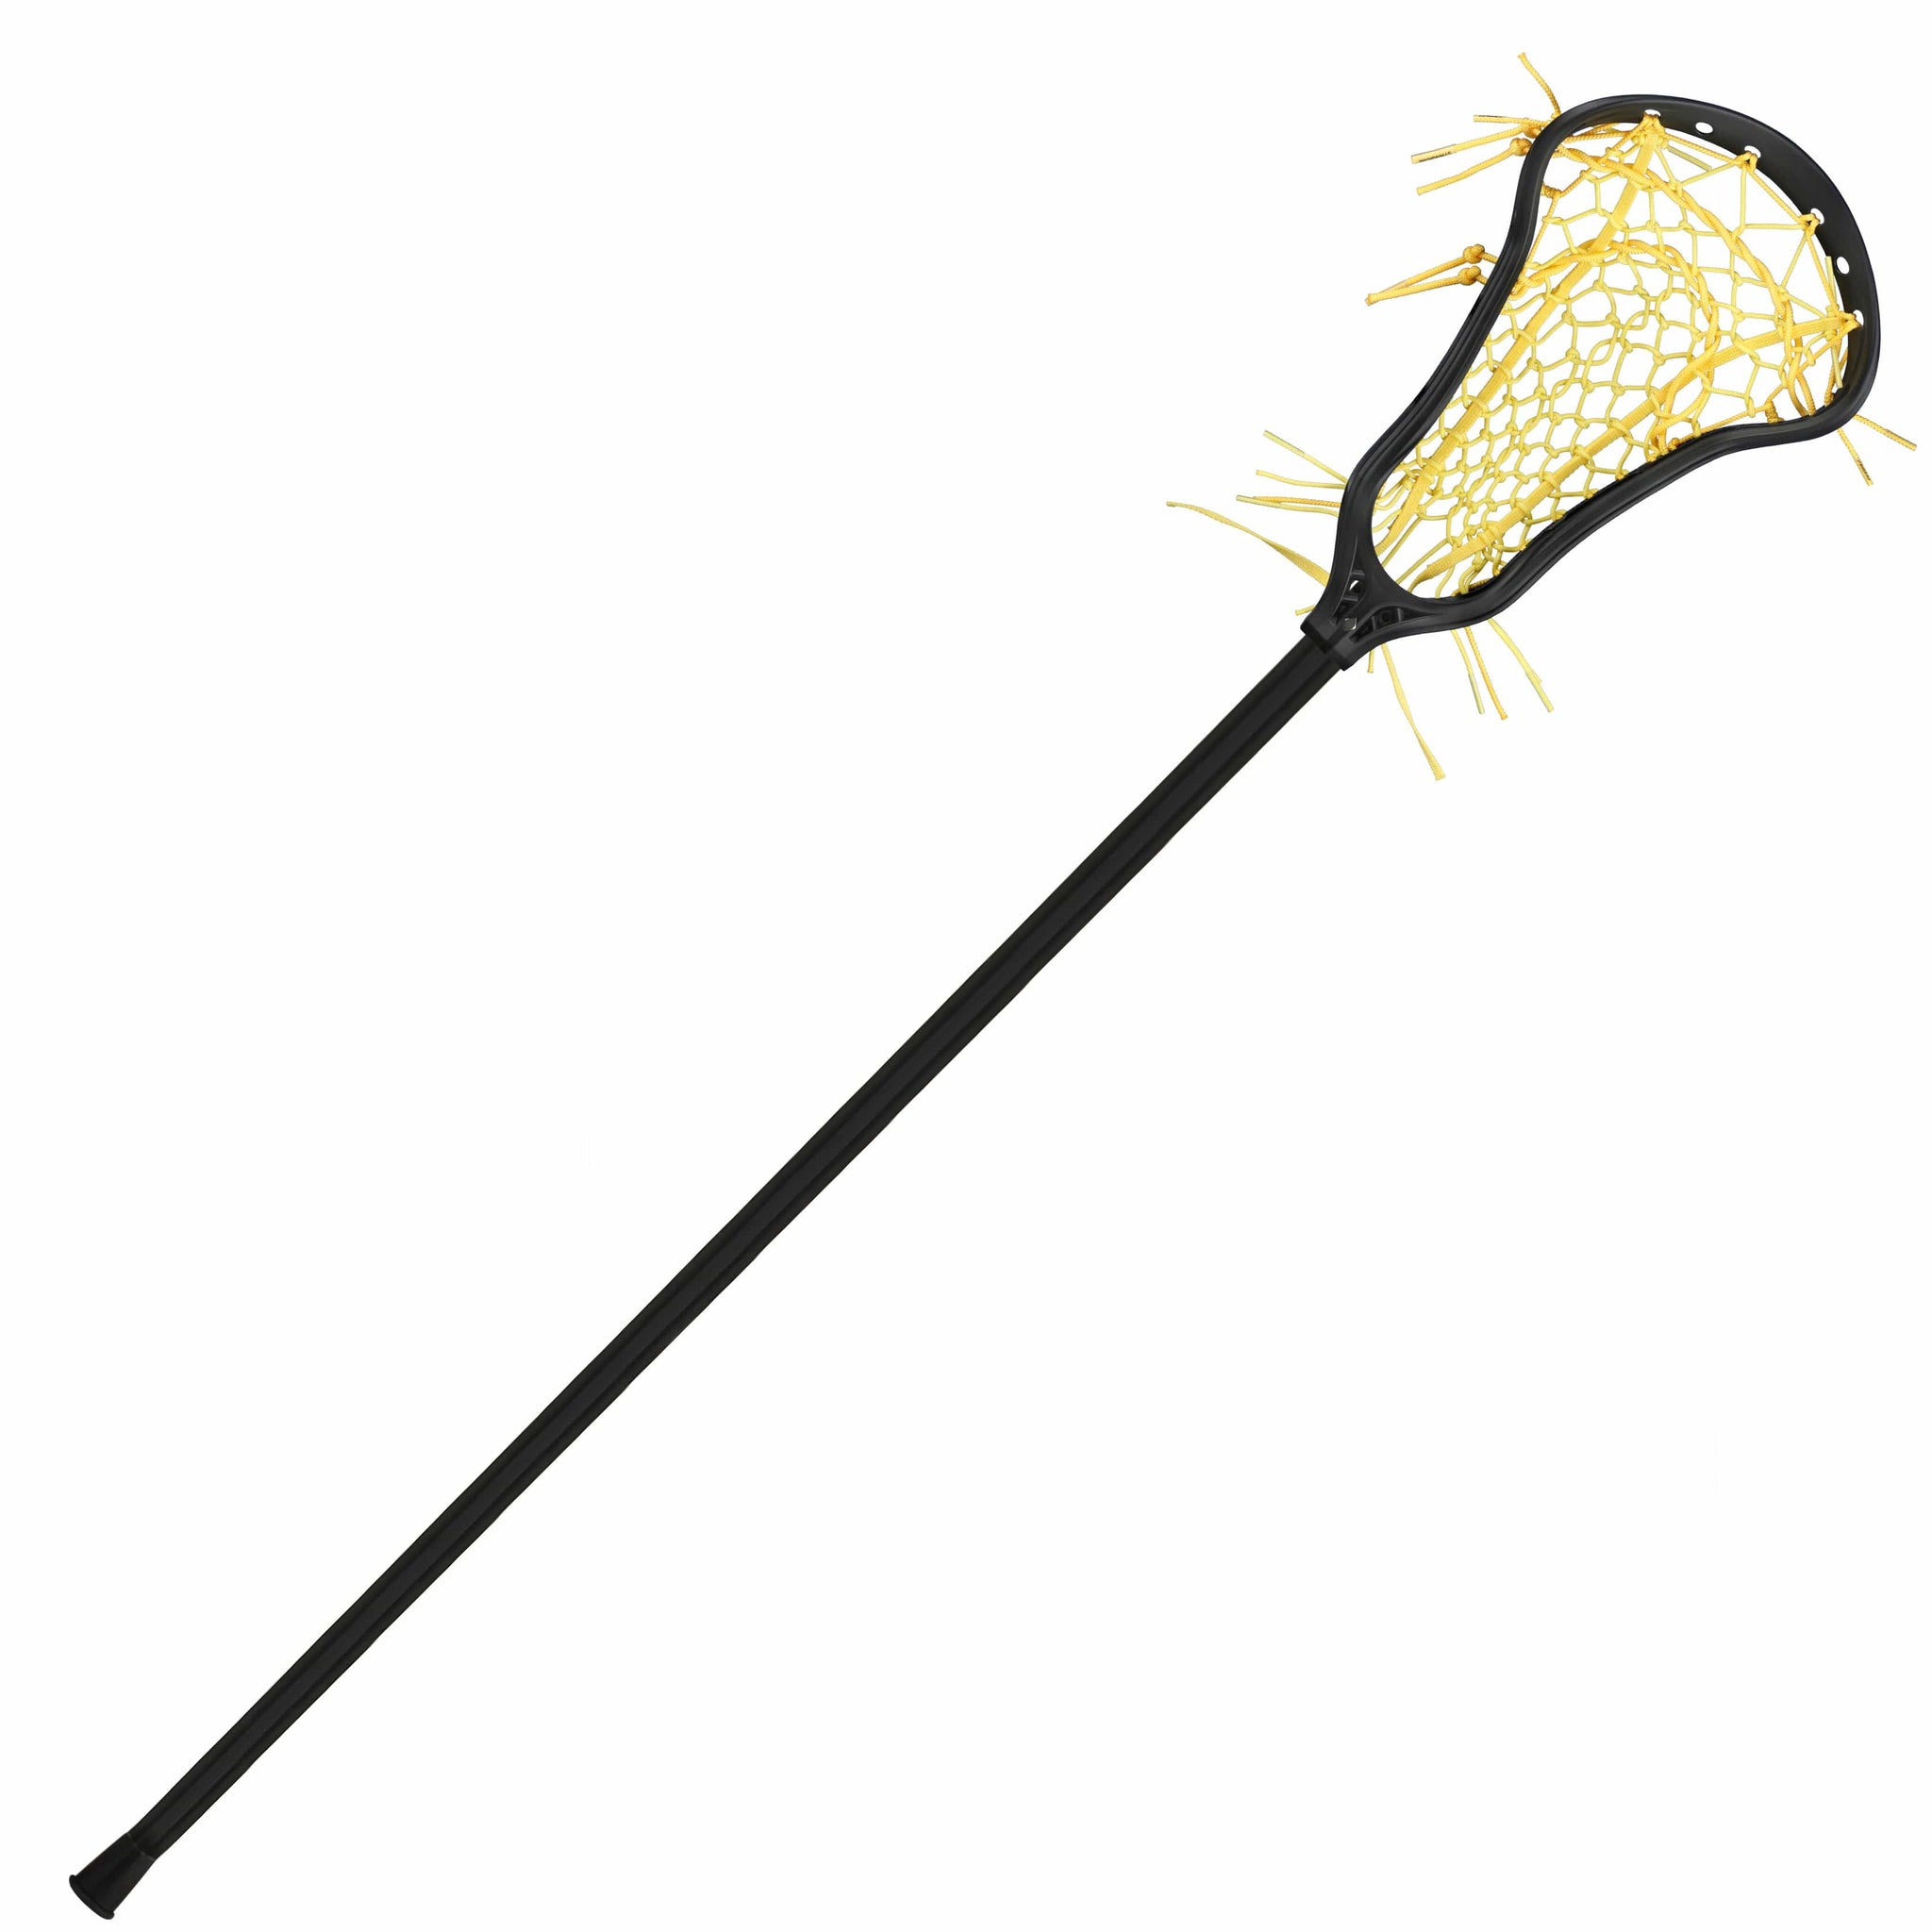 StringKing Womens Complete 2 Pro Offense Lacrosse Stick with Tech